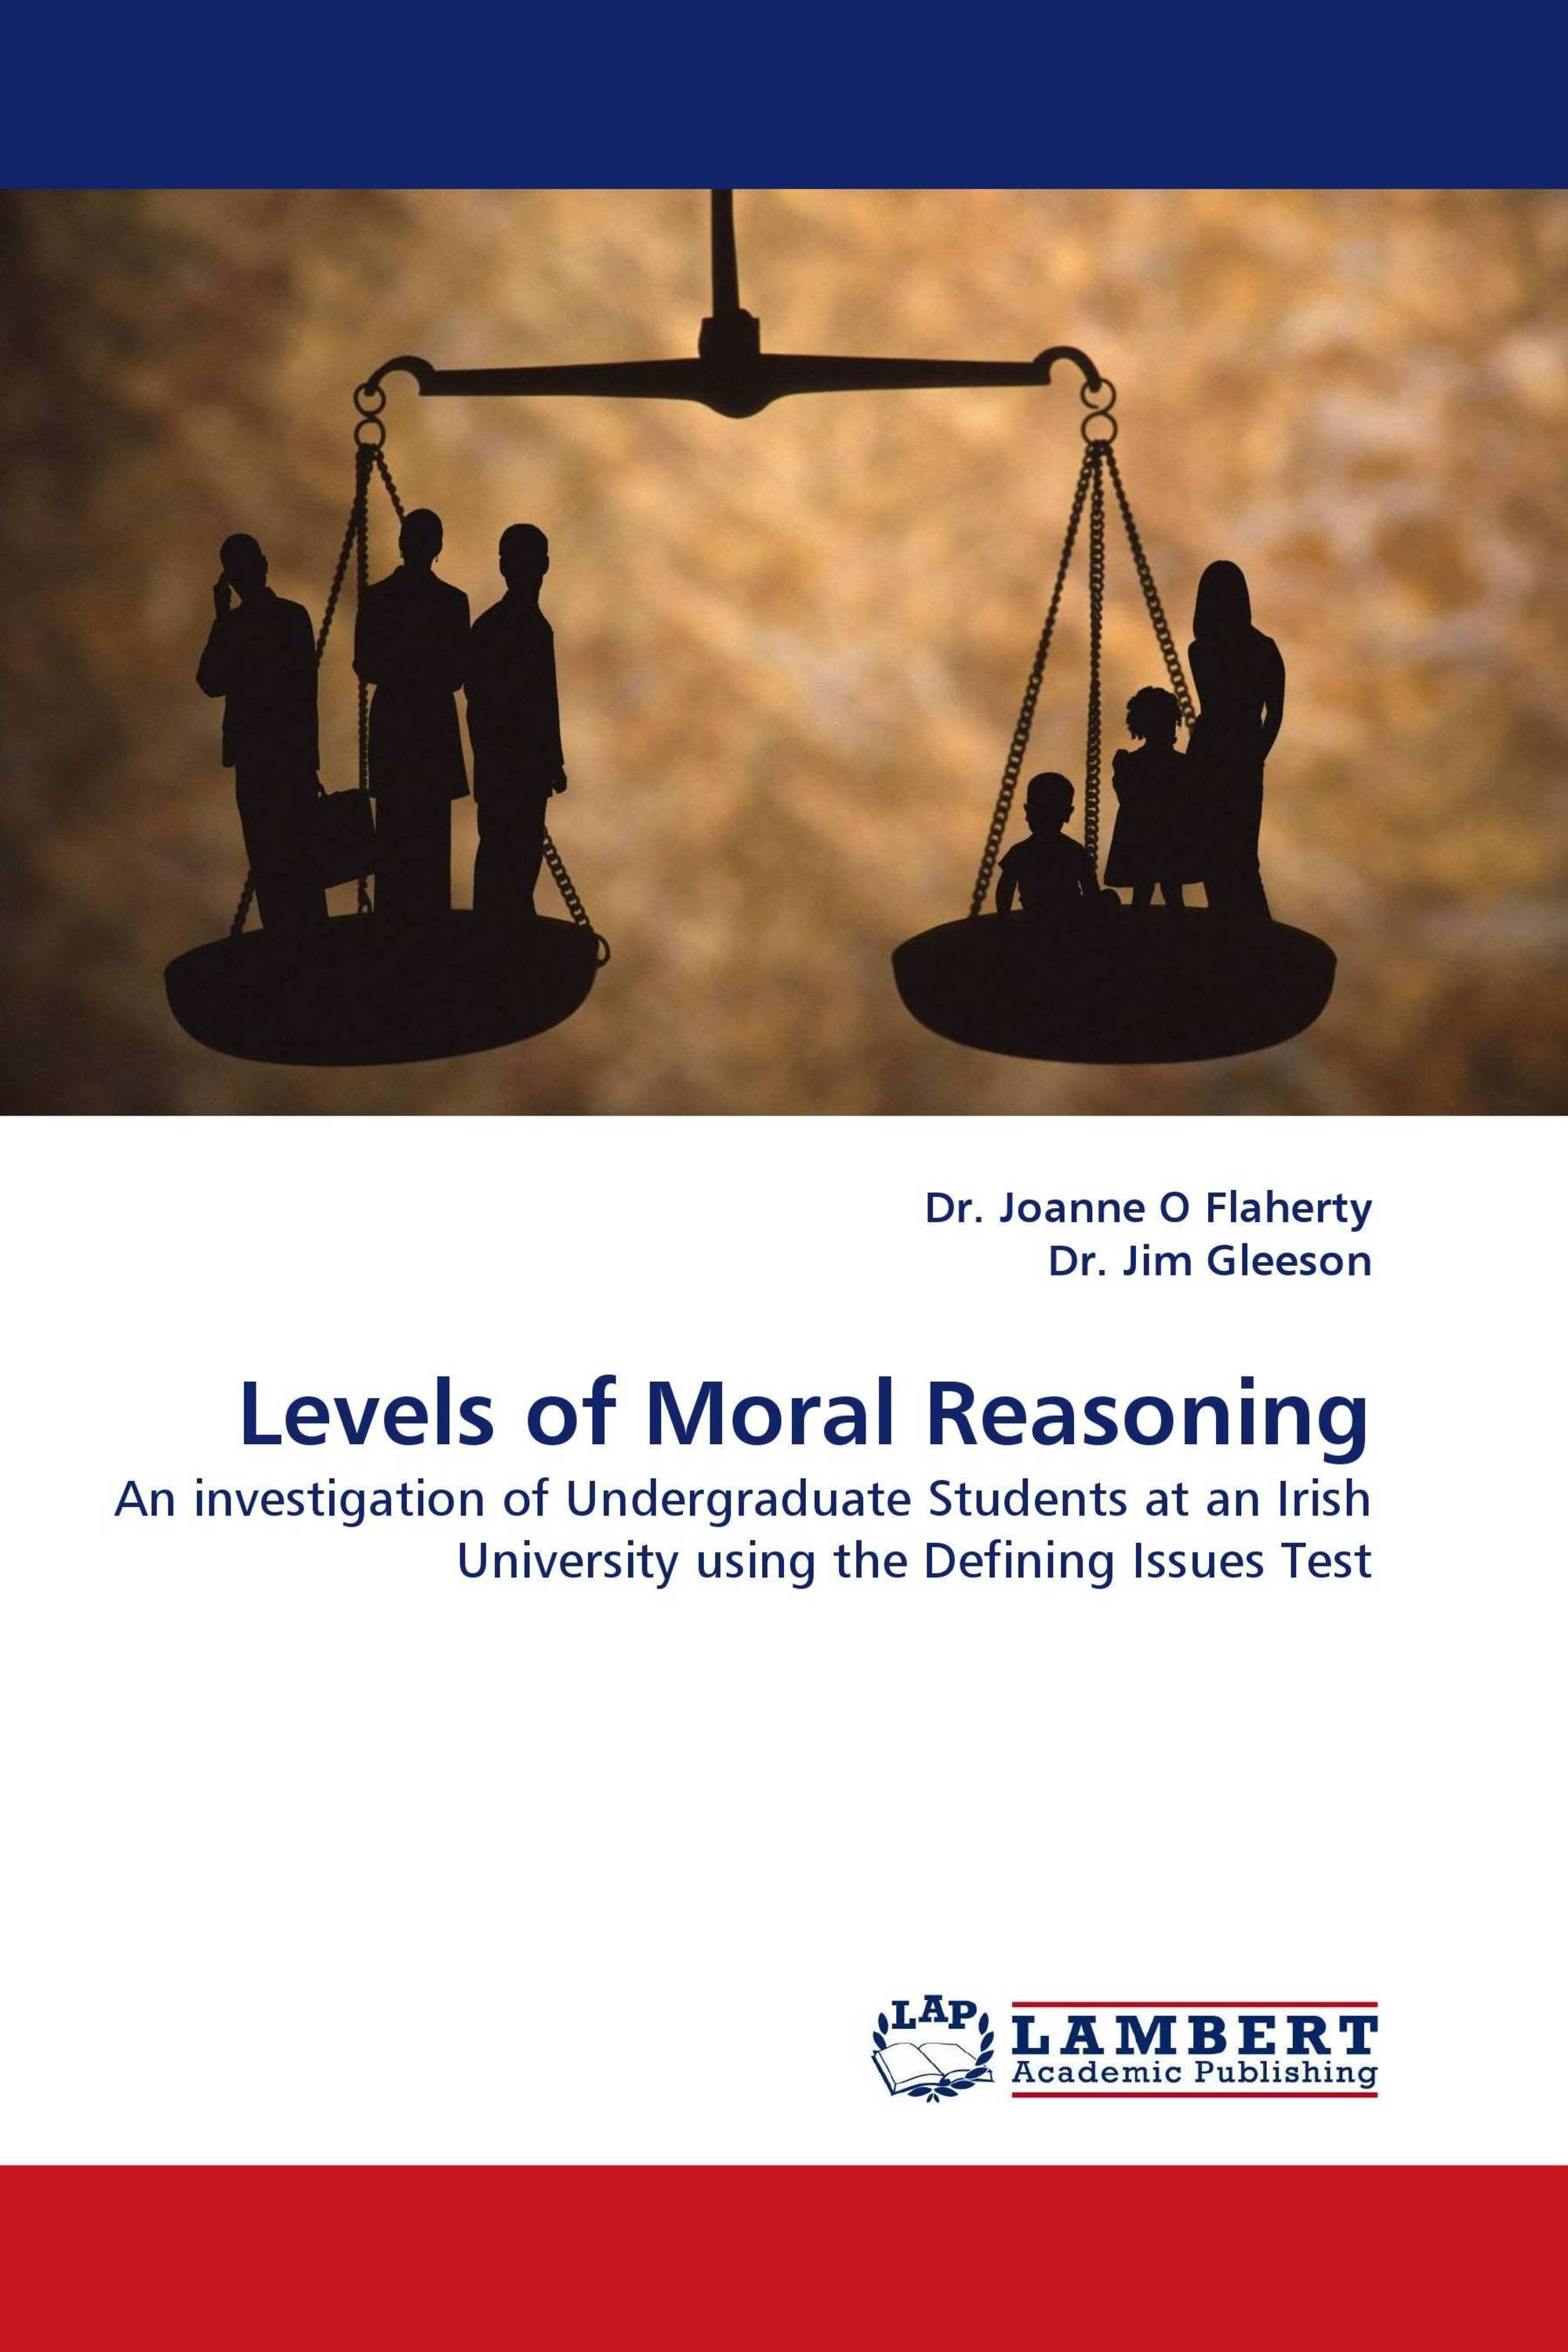 moral reasoning meaning essay